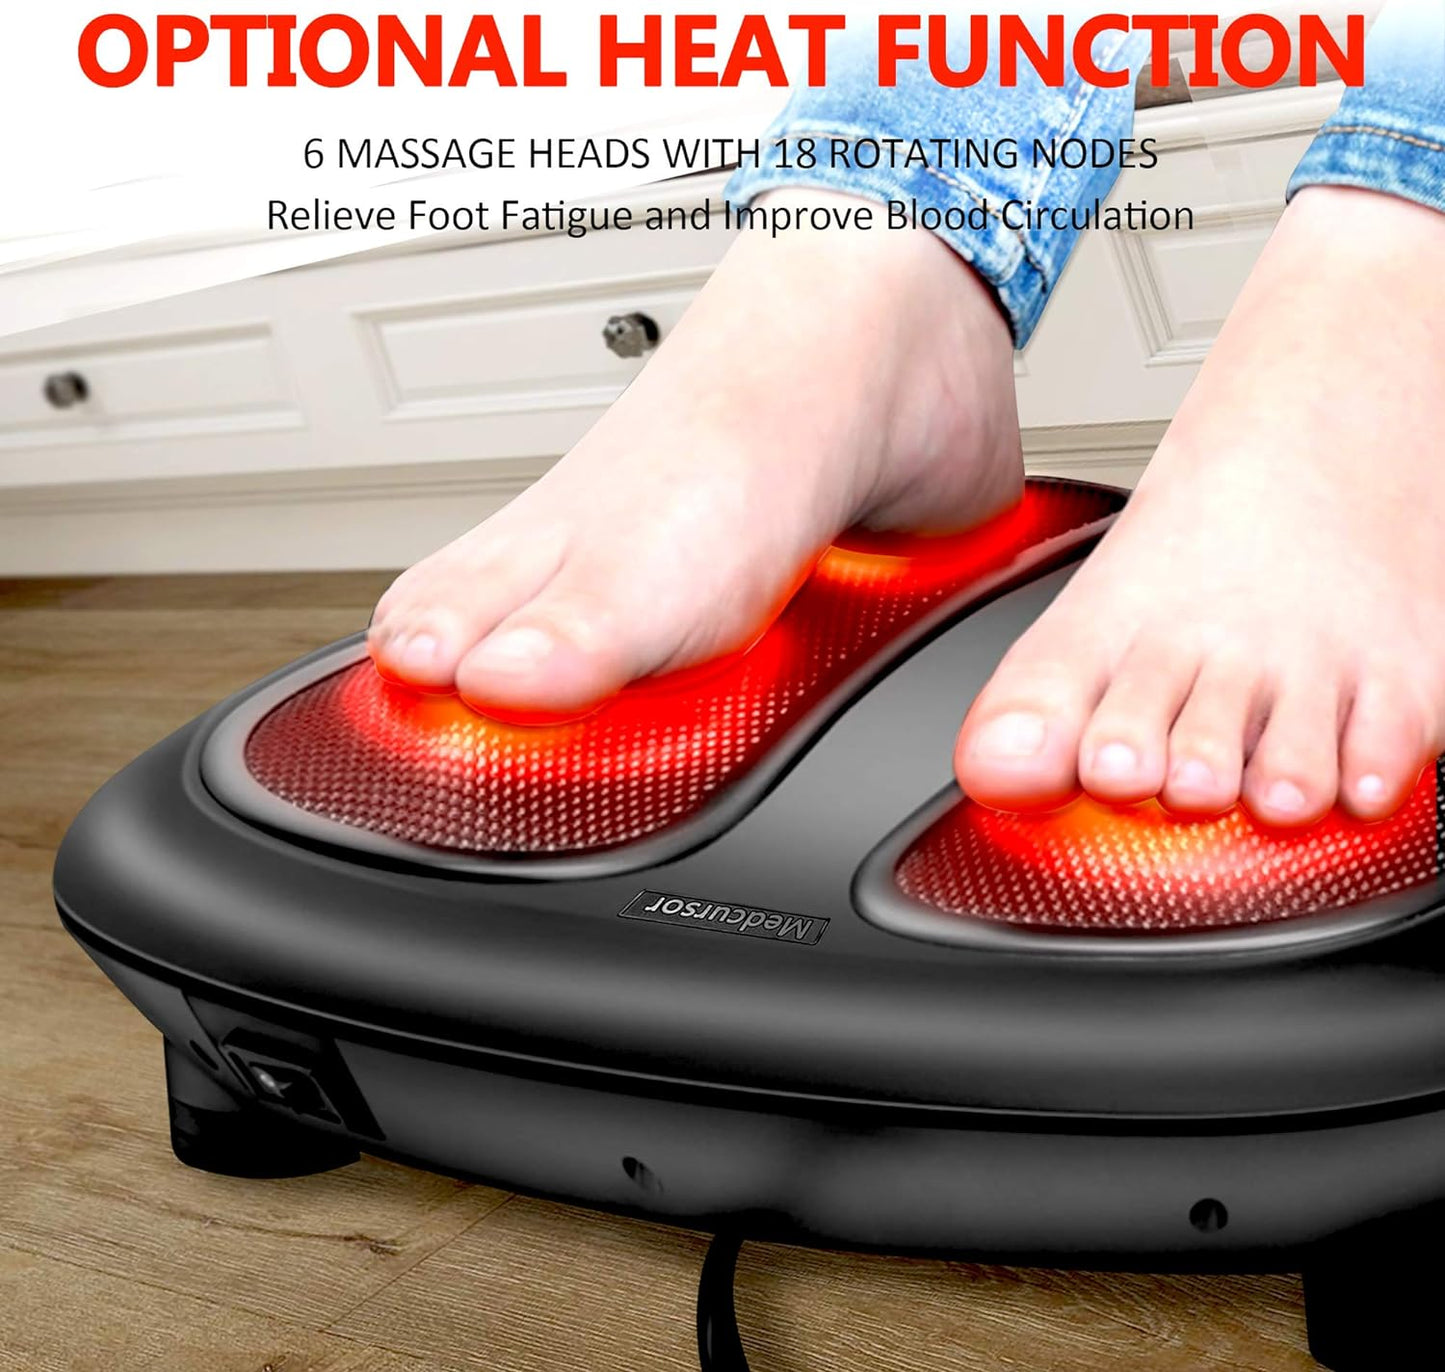 Medcursor Shiatsu Foot Massager with Heat, Electric Deep Kneading Massage Machine for Muscle Fatigue Relief, Improve Body Circulation for Home and Office Use, Black